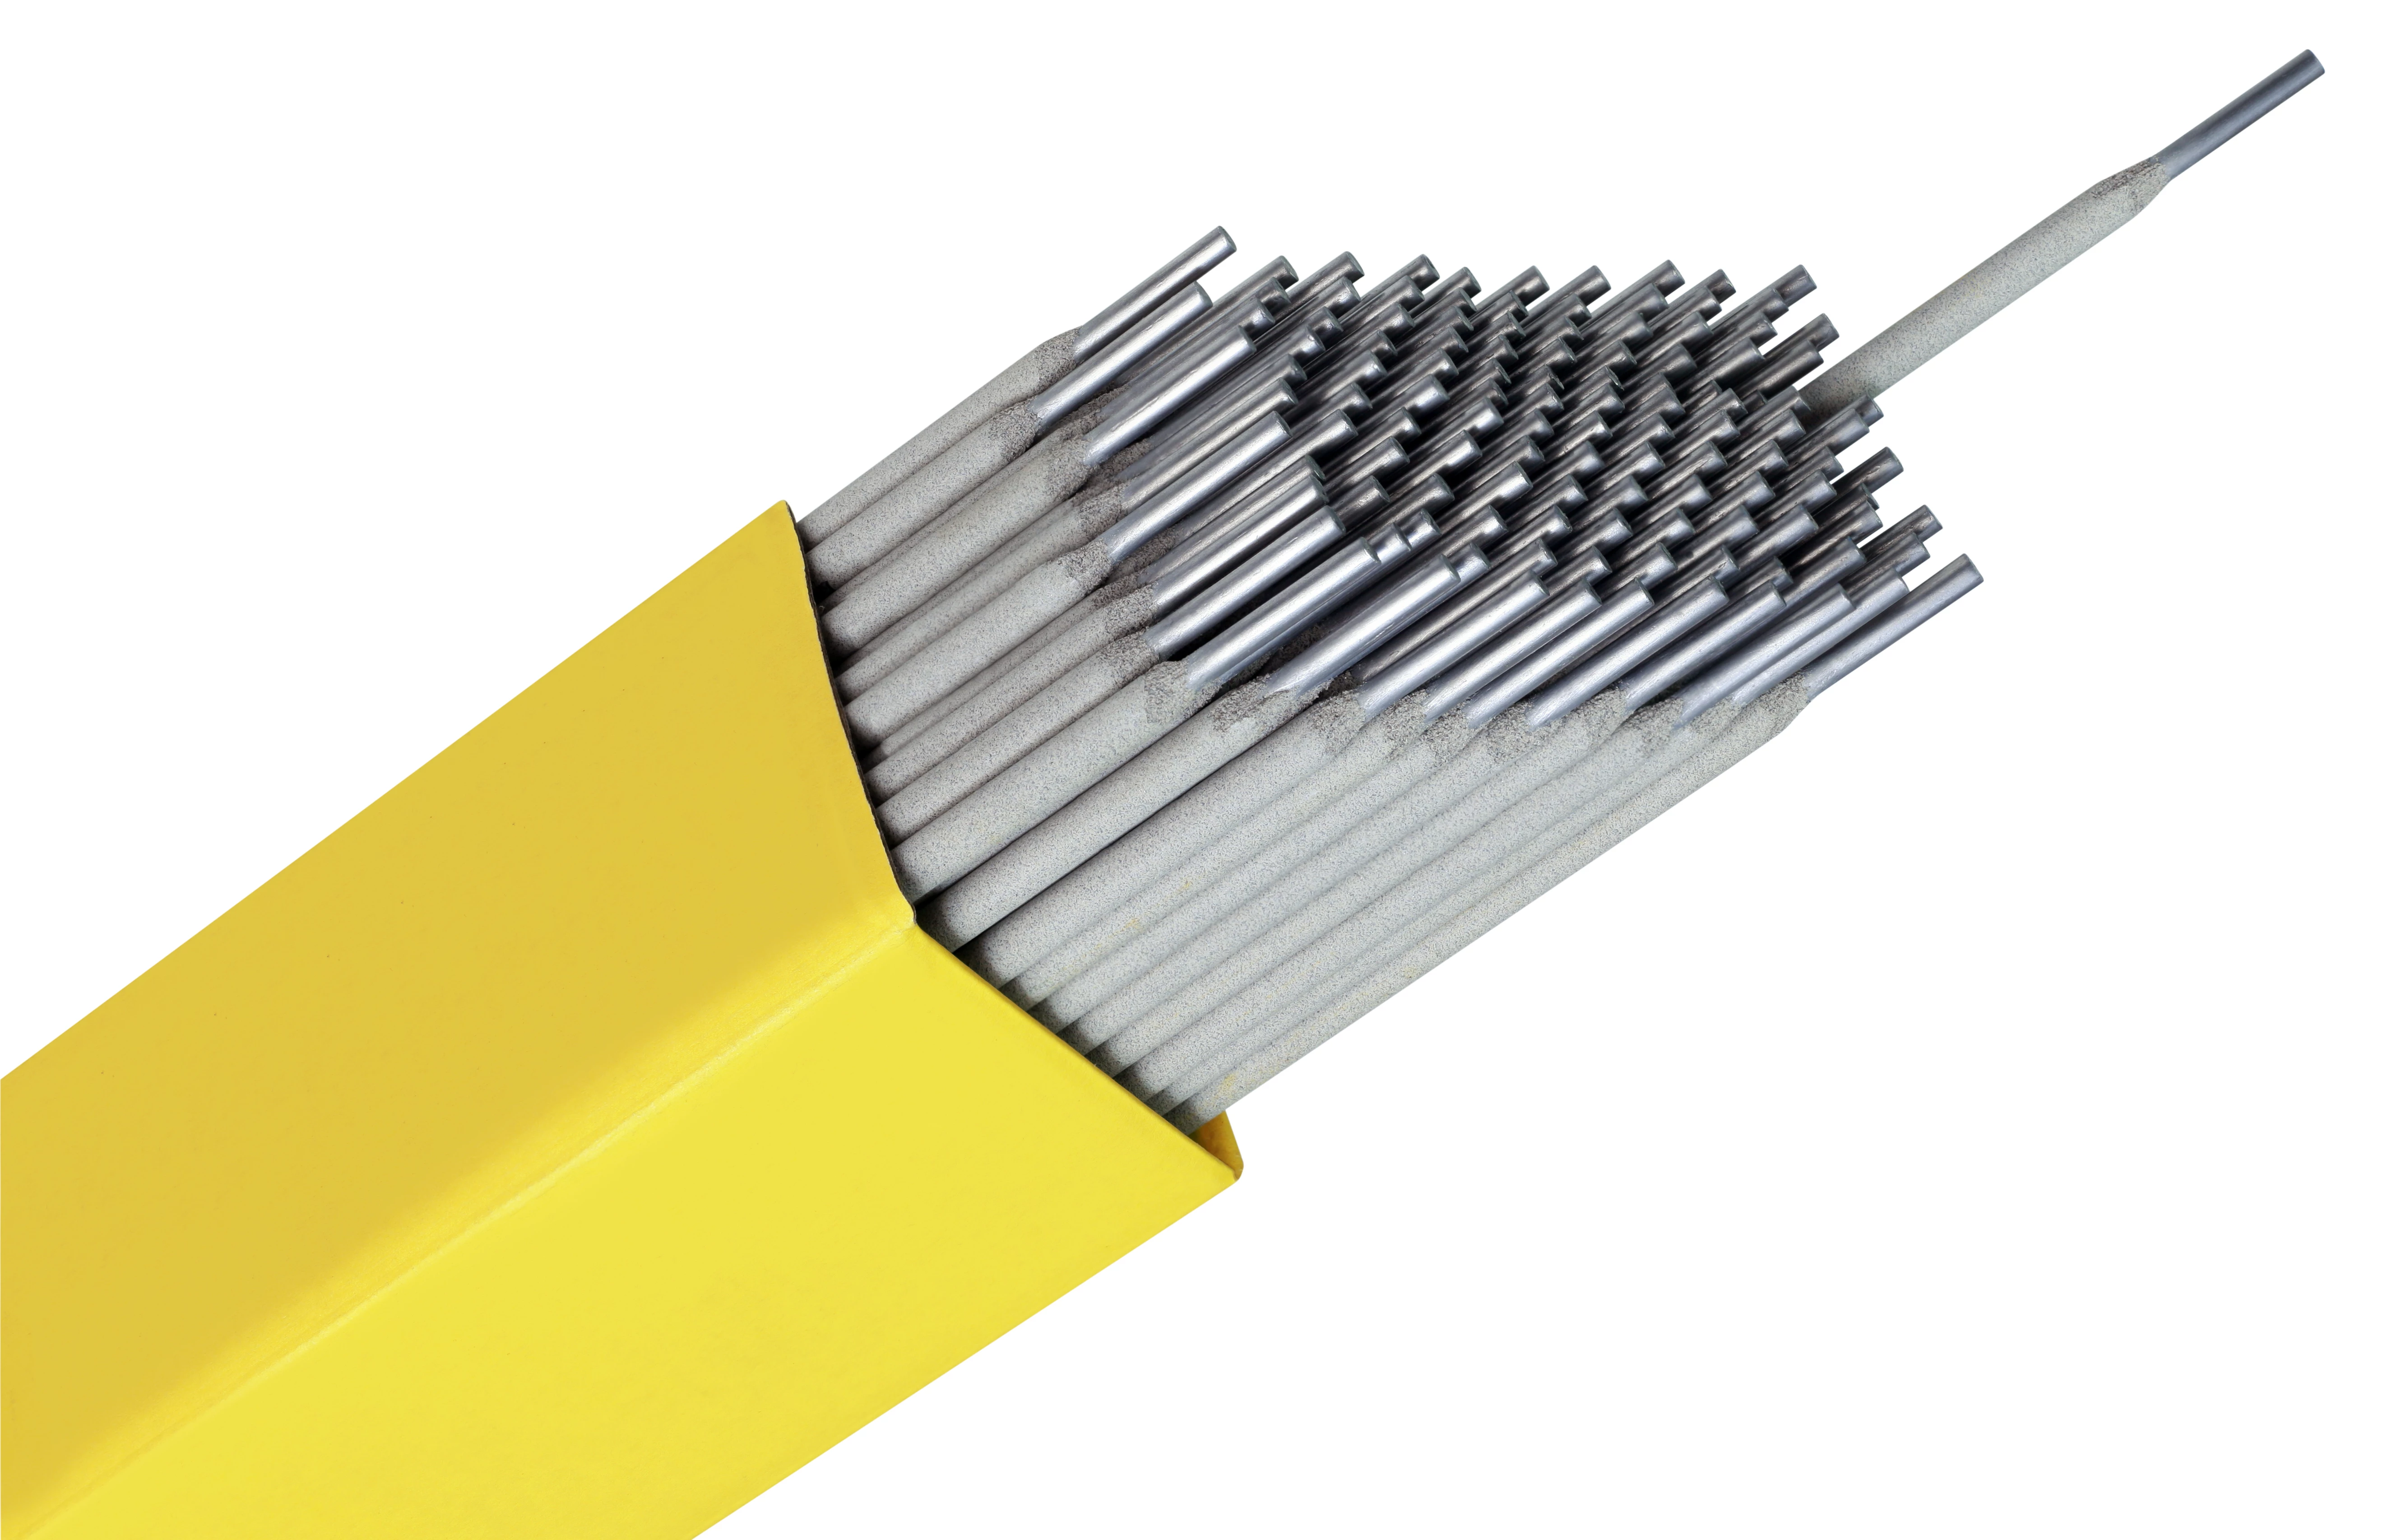 Product Category: Welding electrode